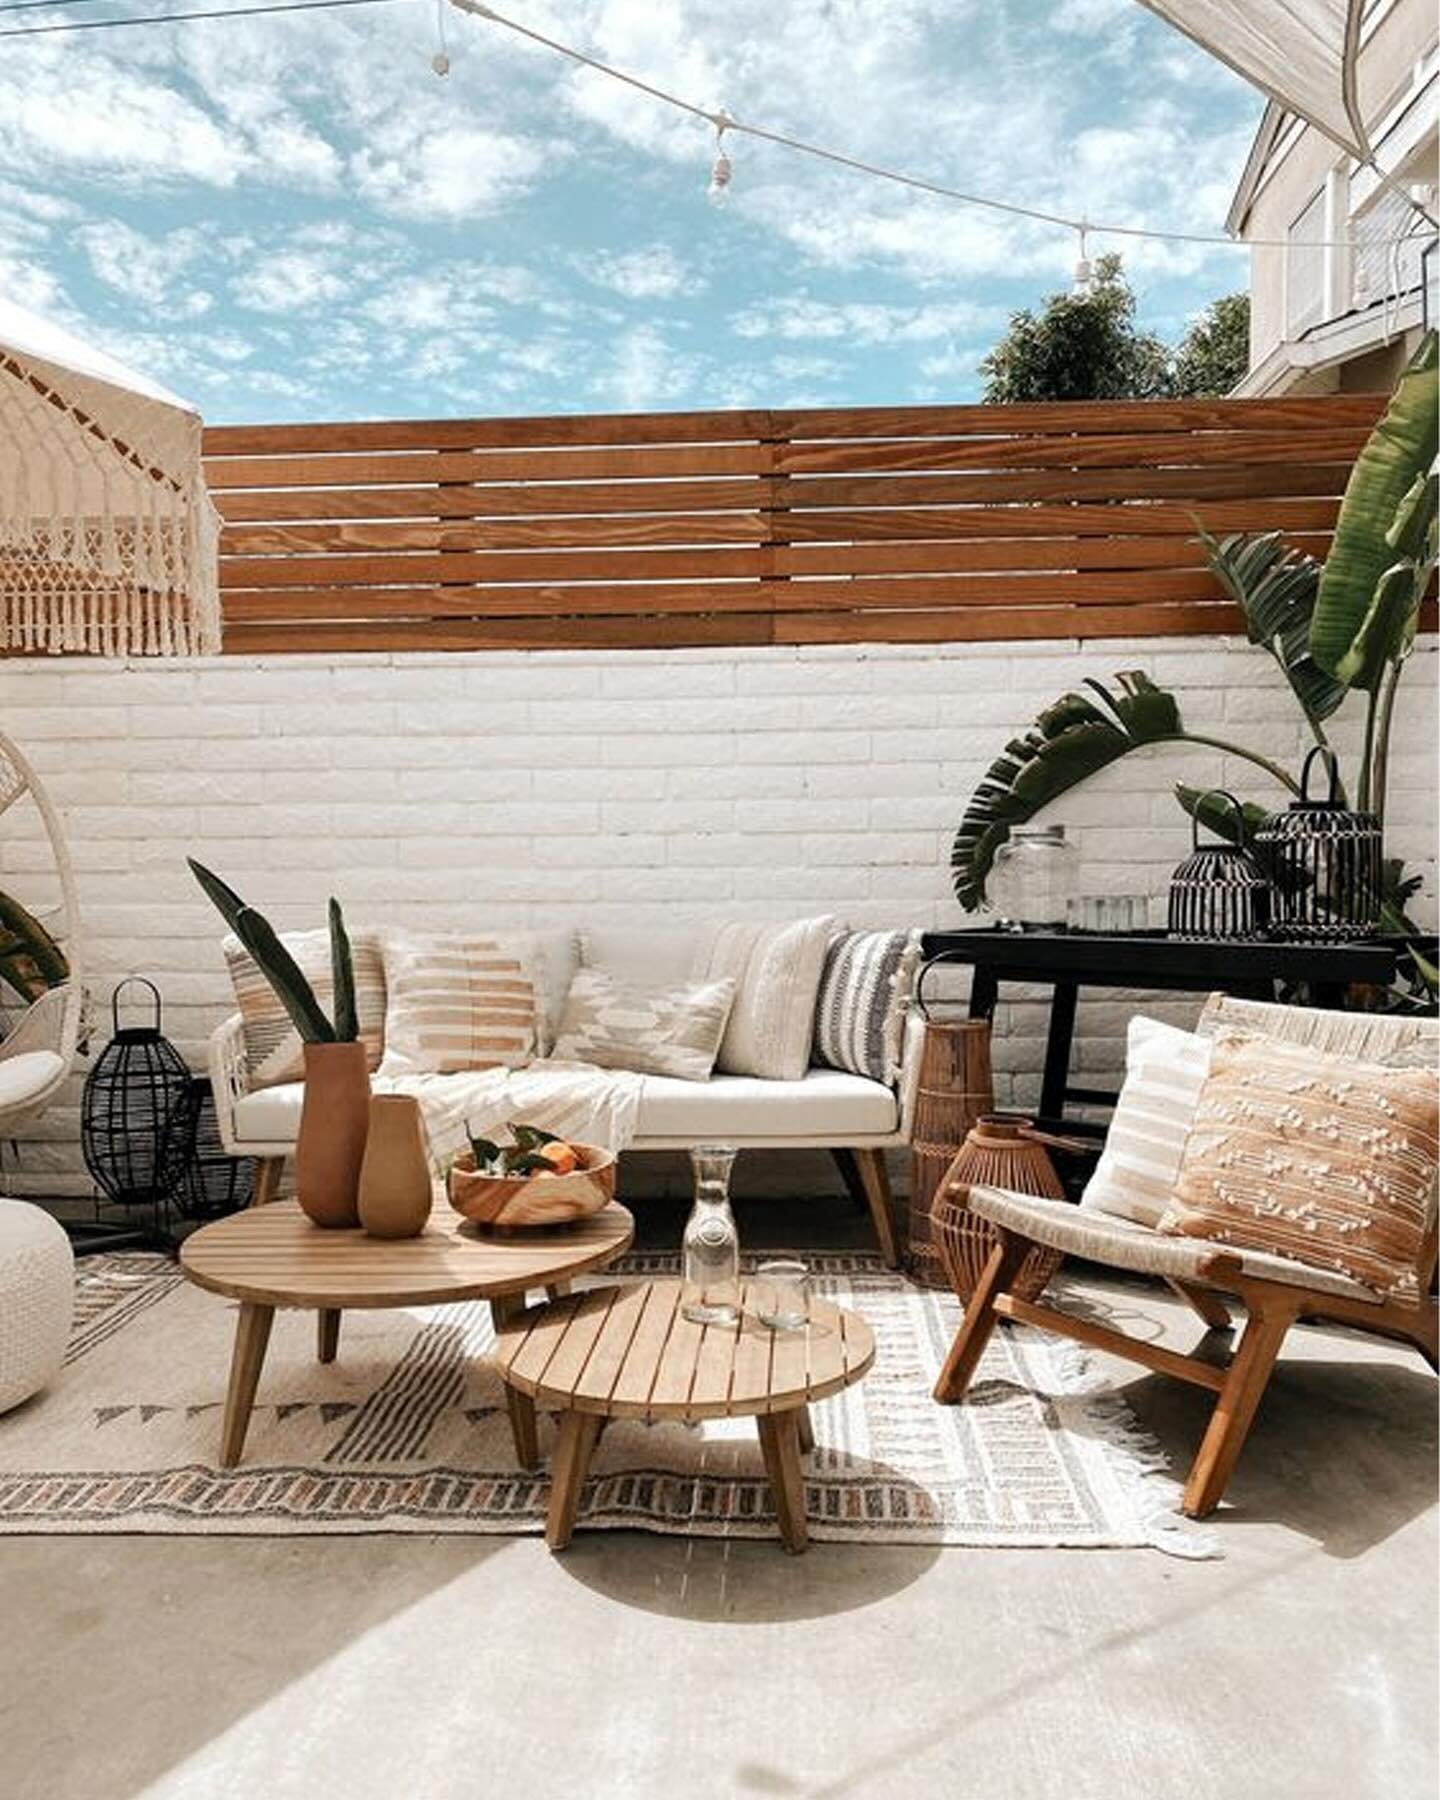 Now that spring is here, it&rsquo;s time to embrace the great outdoors! If your home lacks a cozy outdoor spot, here&rsquo;s how you can create your very own 🌿 𝘰𝘶𝘵𝘥𝘰𝘰𝘳 𝘰𝘢𝘴𝘪𝘴:

2. Choose the right furniture and accessories for your outdoo